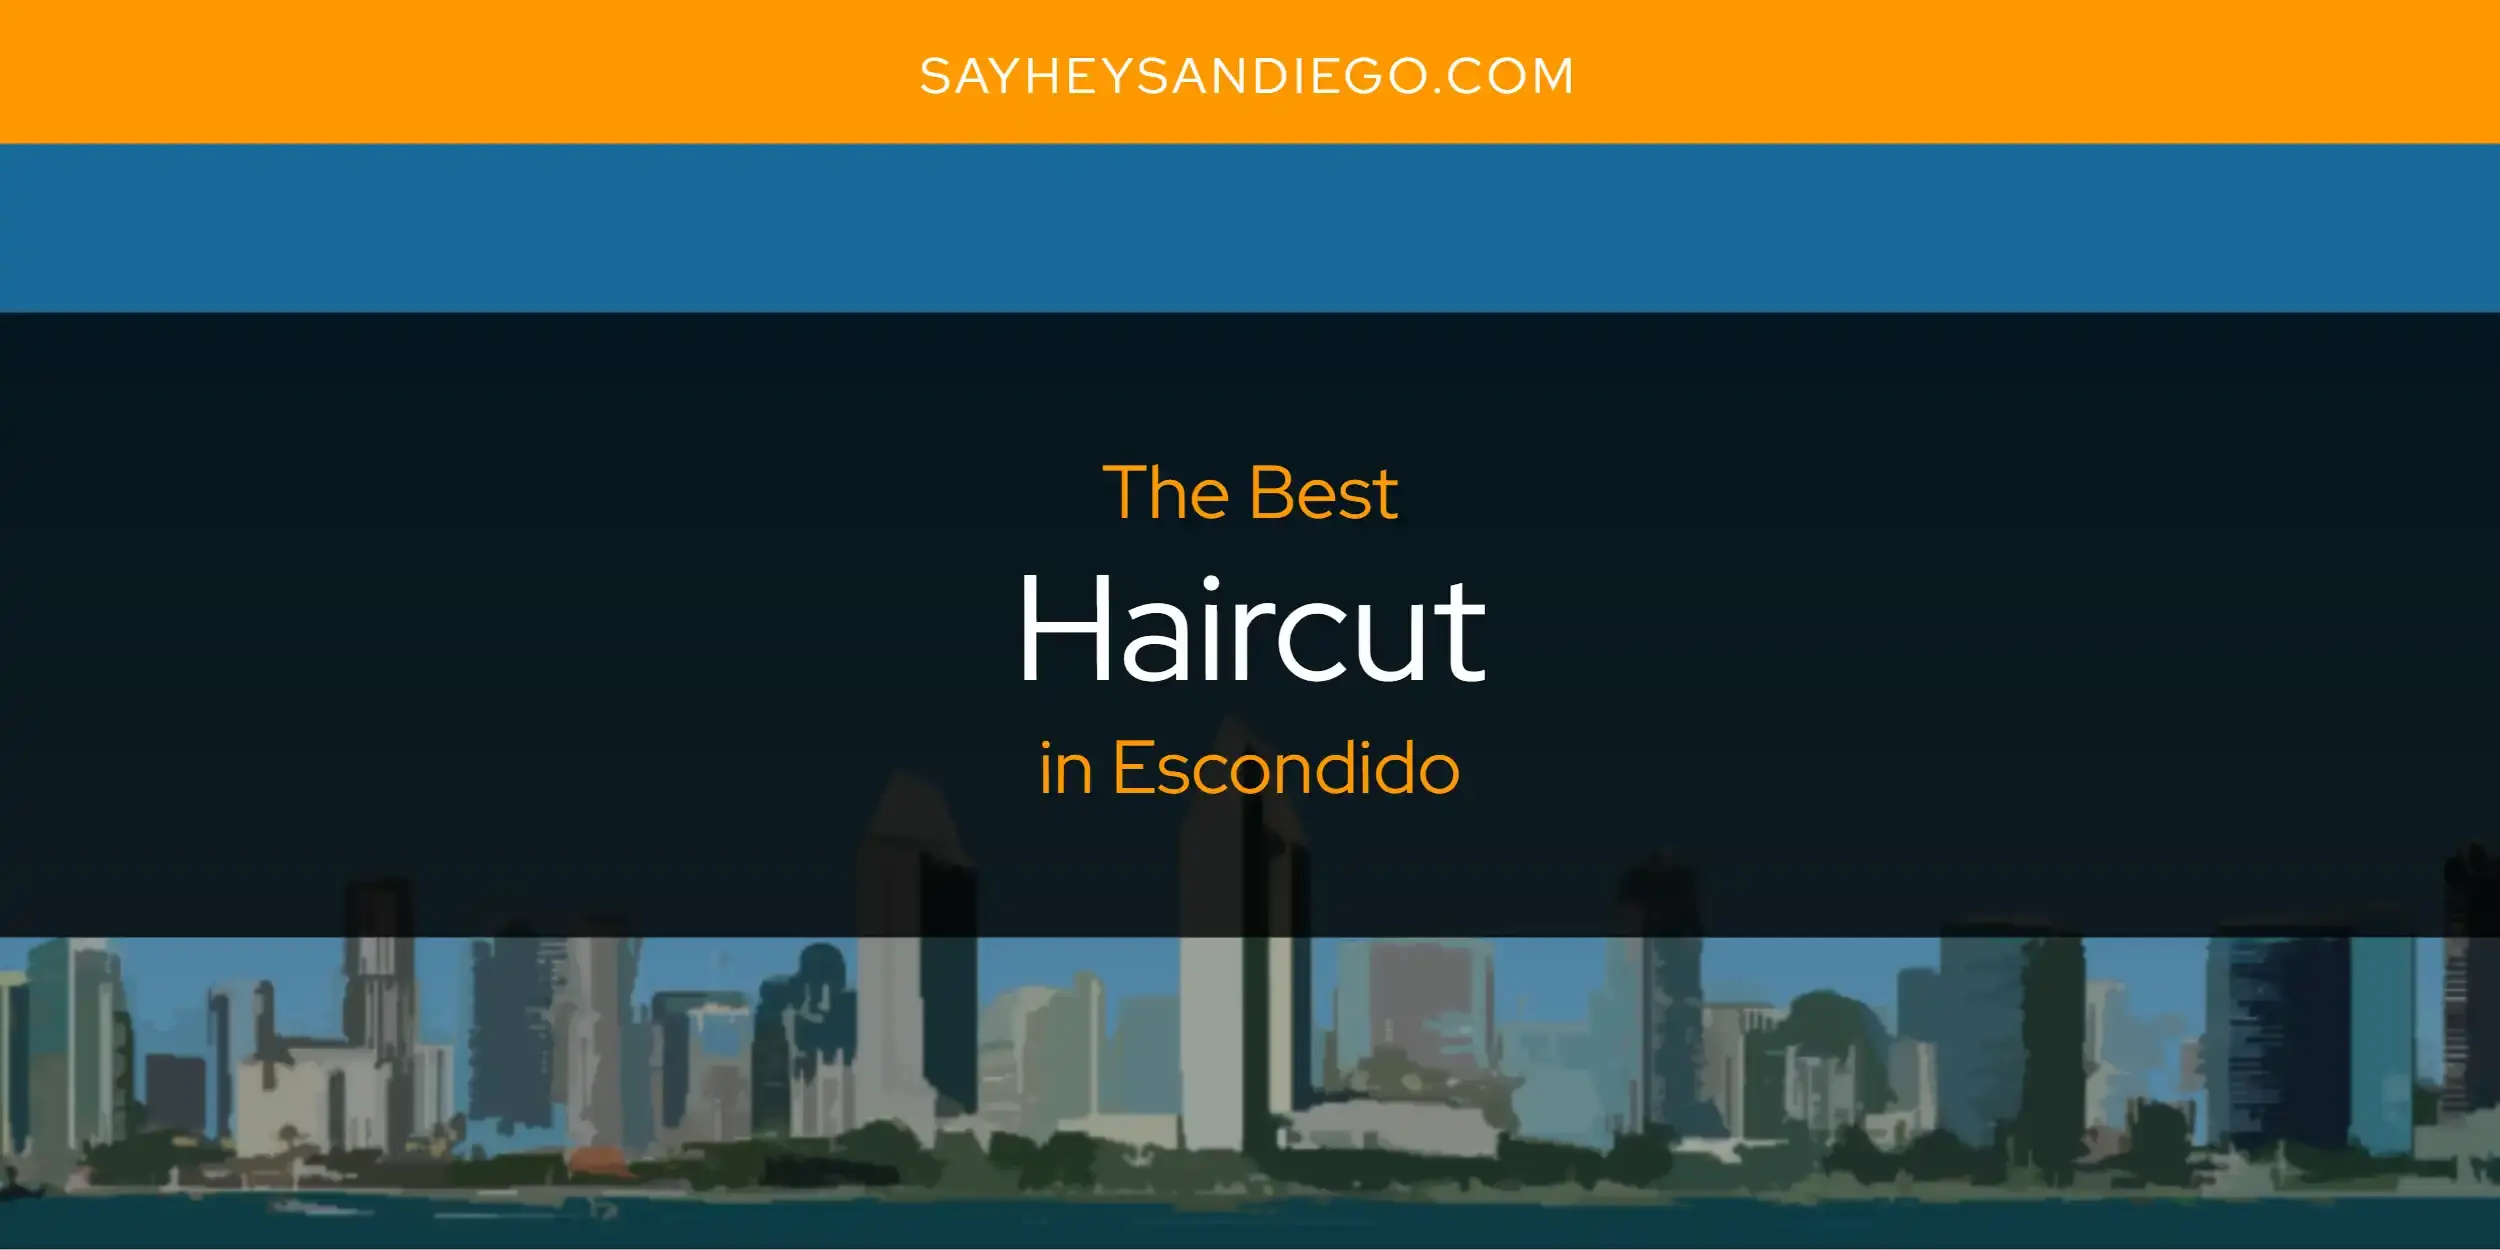 Best Haircut in Escondido? Here's the Top 13